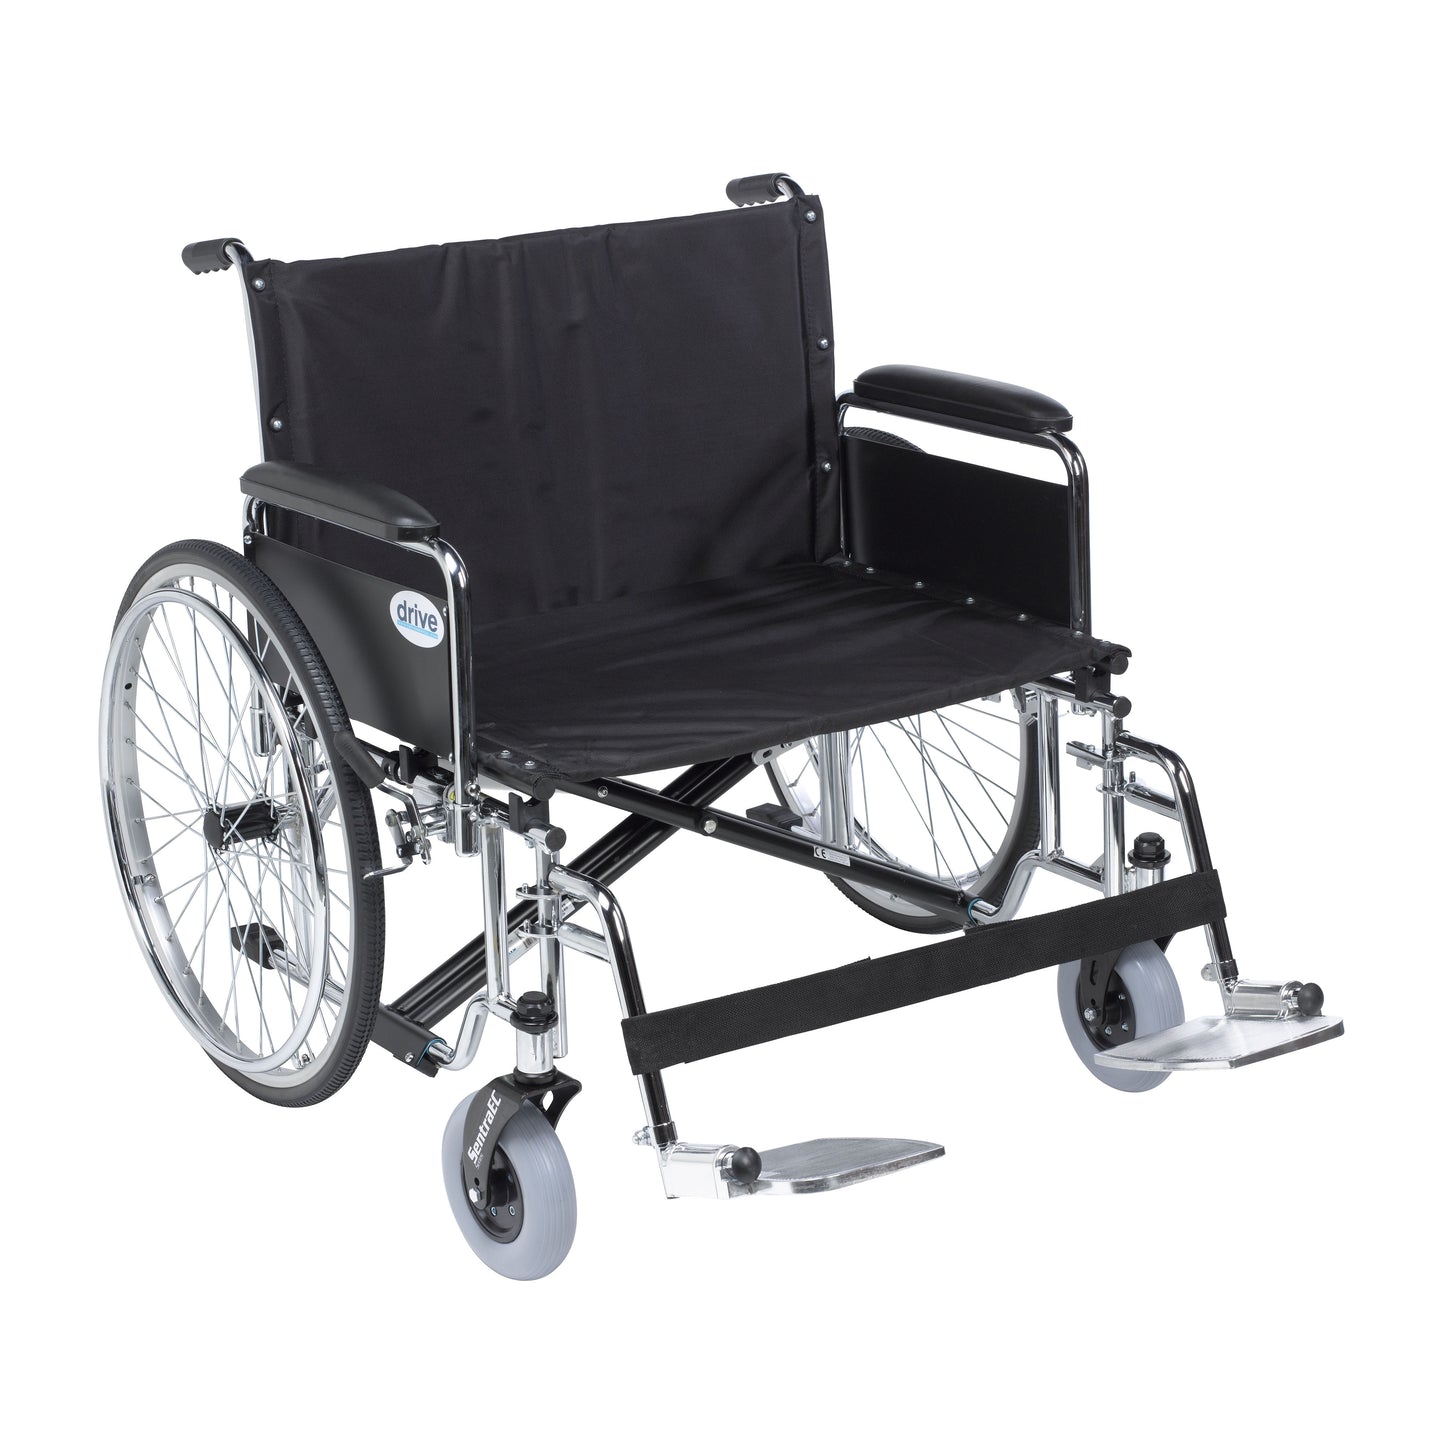 Sentra EC Heavy Duty Extra Wide Wheelchair, Detachable Full Arms, Swing away Footrests, 28" Seat